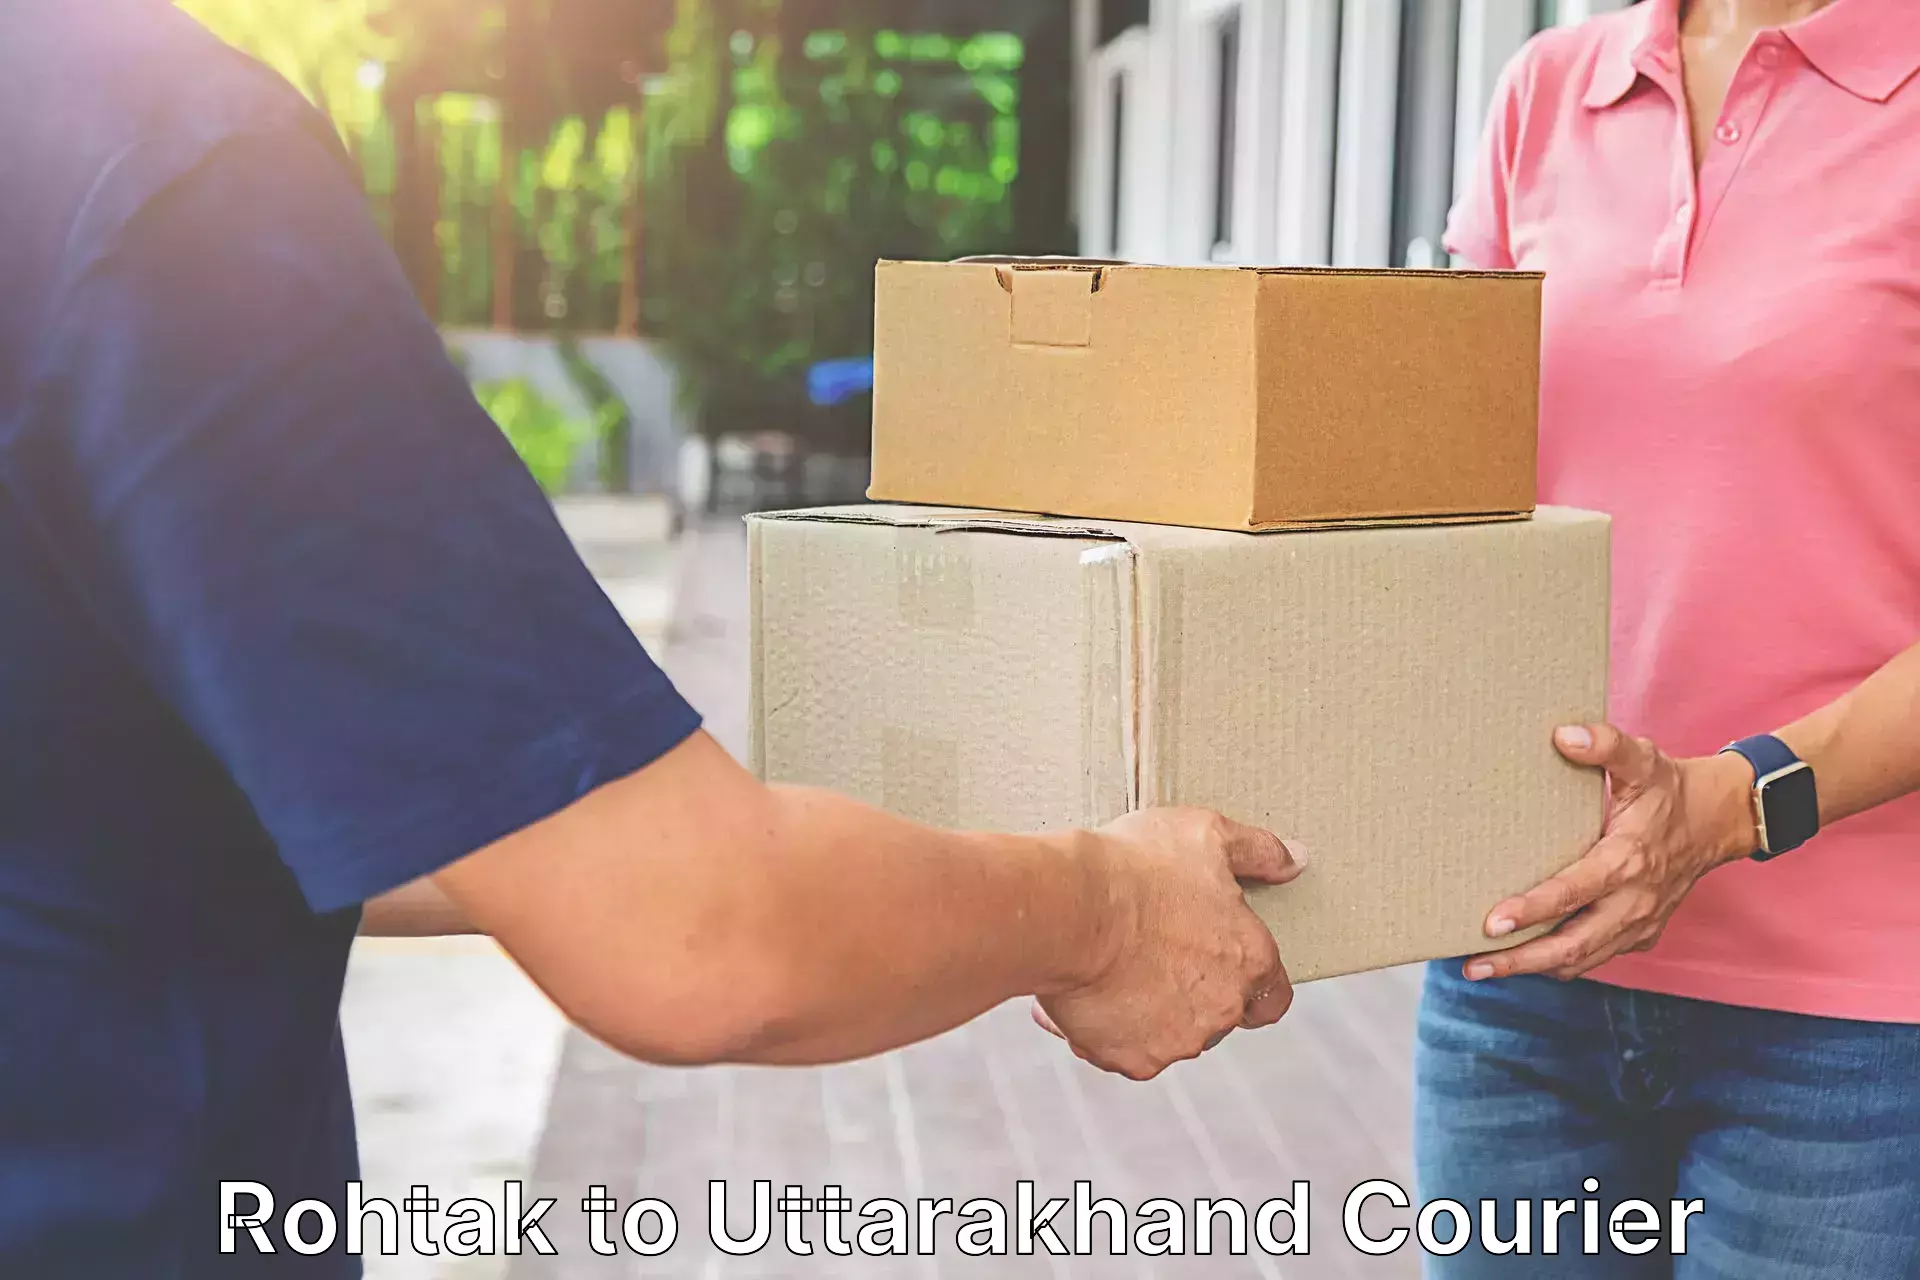 Express delivery solutions Rohtak to Rudrapur